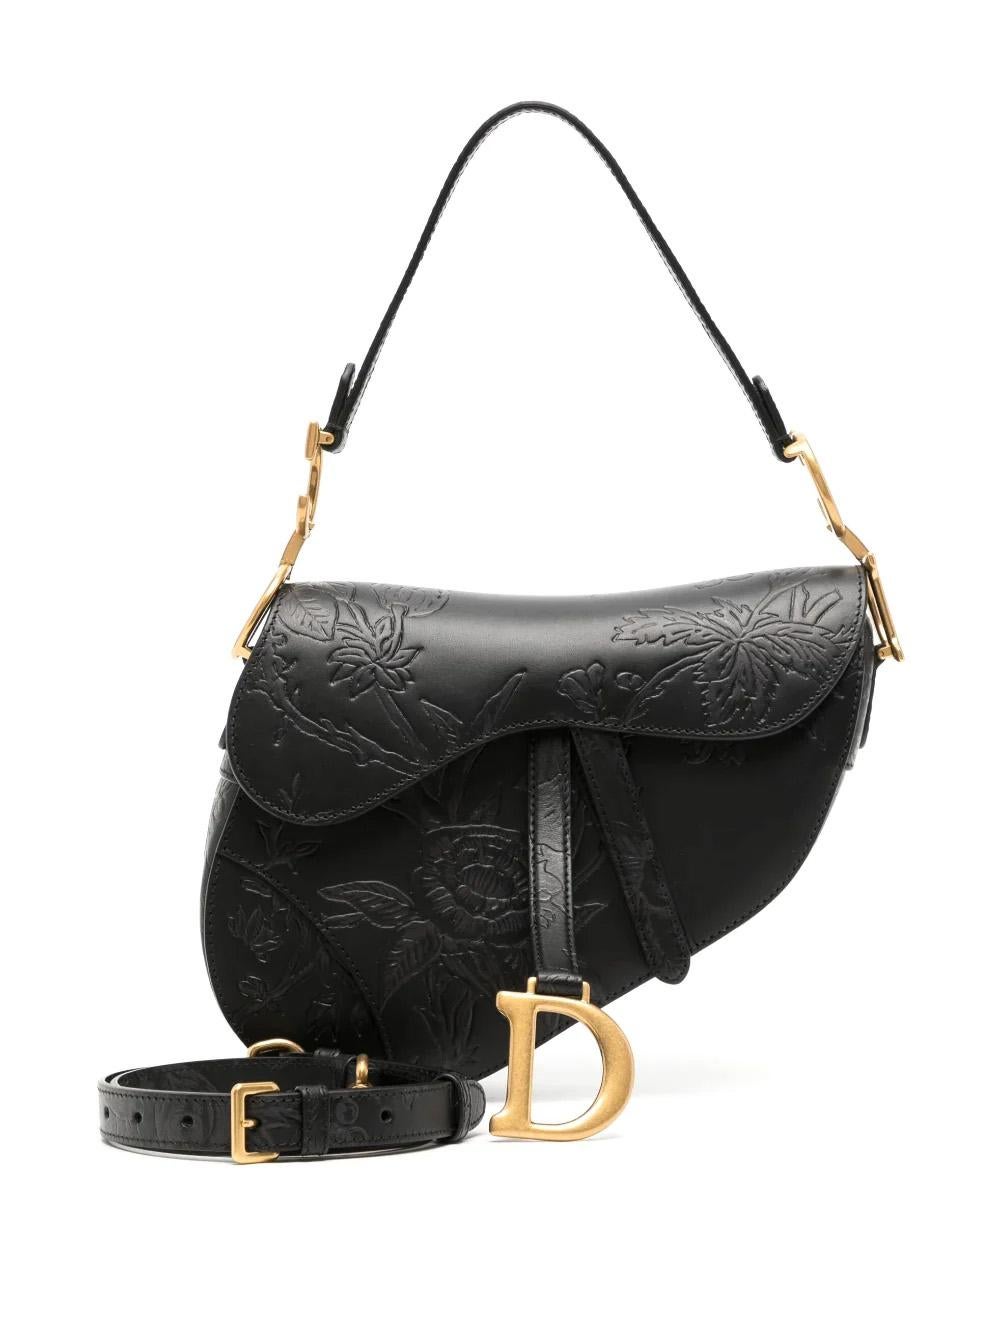 Maria Grazia Chiuri brings a fresh update to the iconic Saddle bag. Crafted in black Sbalzo calfskin, it is sculpted and hand-painted with the Dior Jardin Botanique motif, a romantic floral pattern inspired by the Granville gardens so dear to Mr.